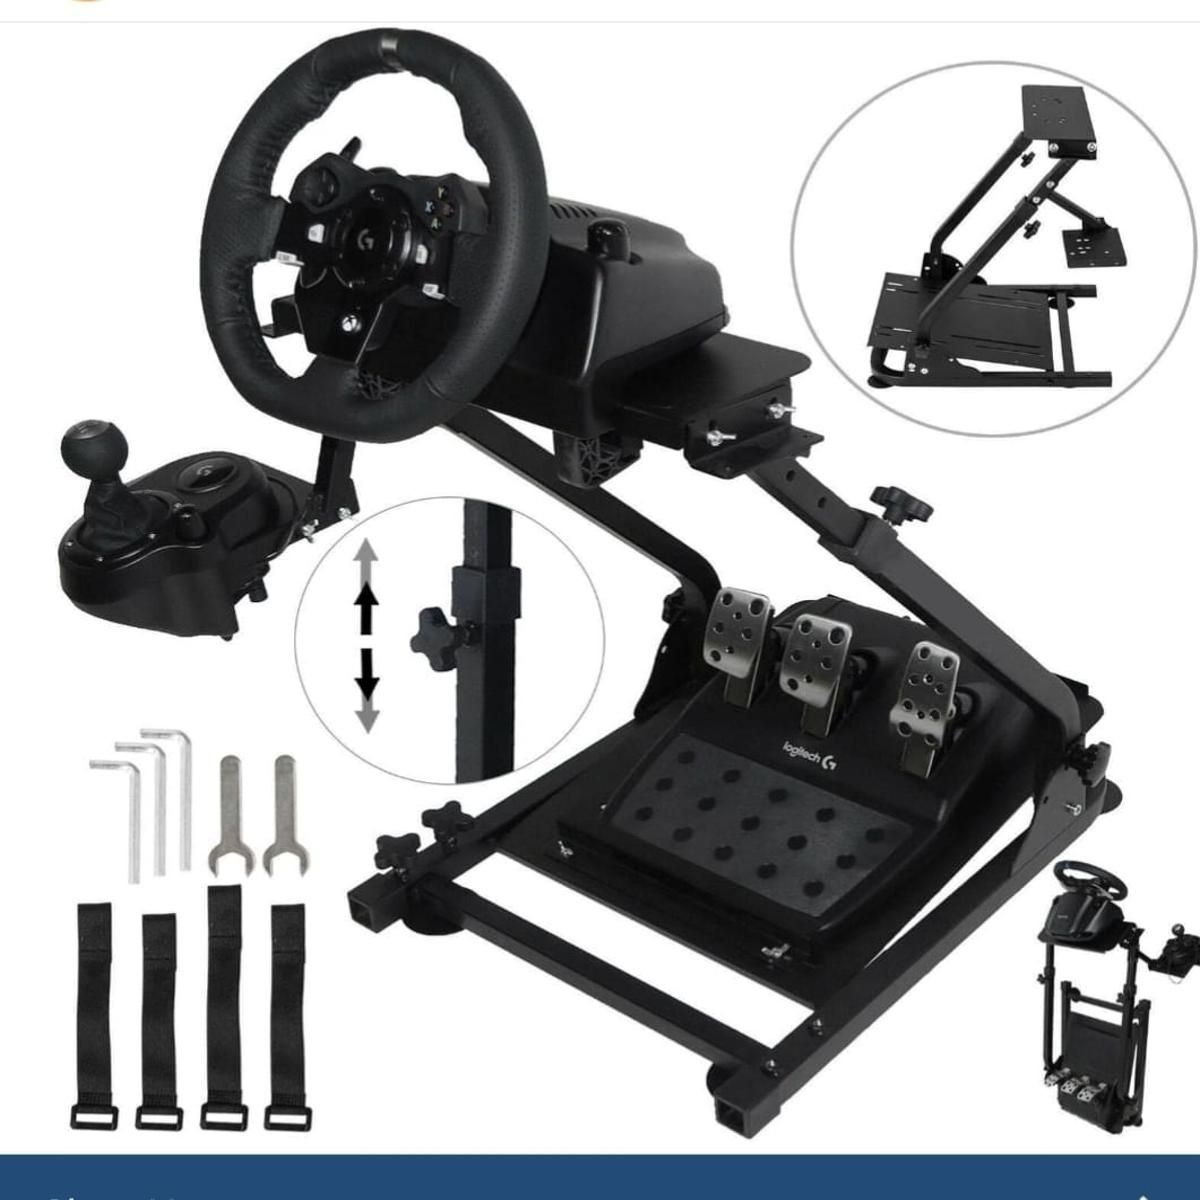 Steering Wheel Stand for Logitech G920/G25/G27/G29/G923 Wheel , Driving Gaming Siimulator Racing Rig , Pedal & Shifters Not Included.: Buy Best Prices in Pakistan Daraz.pk